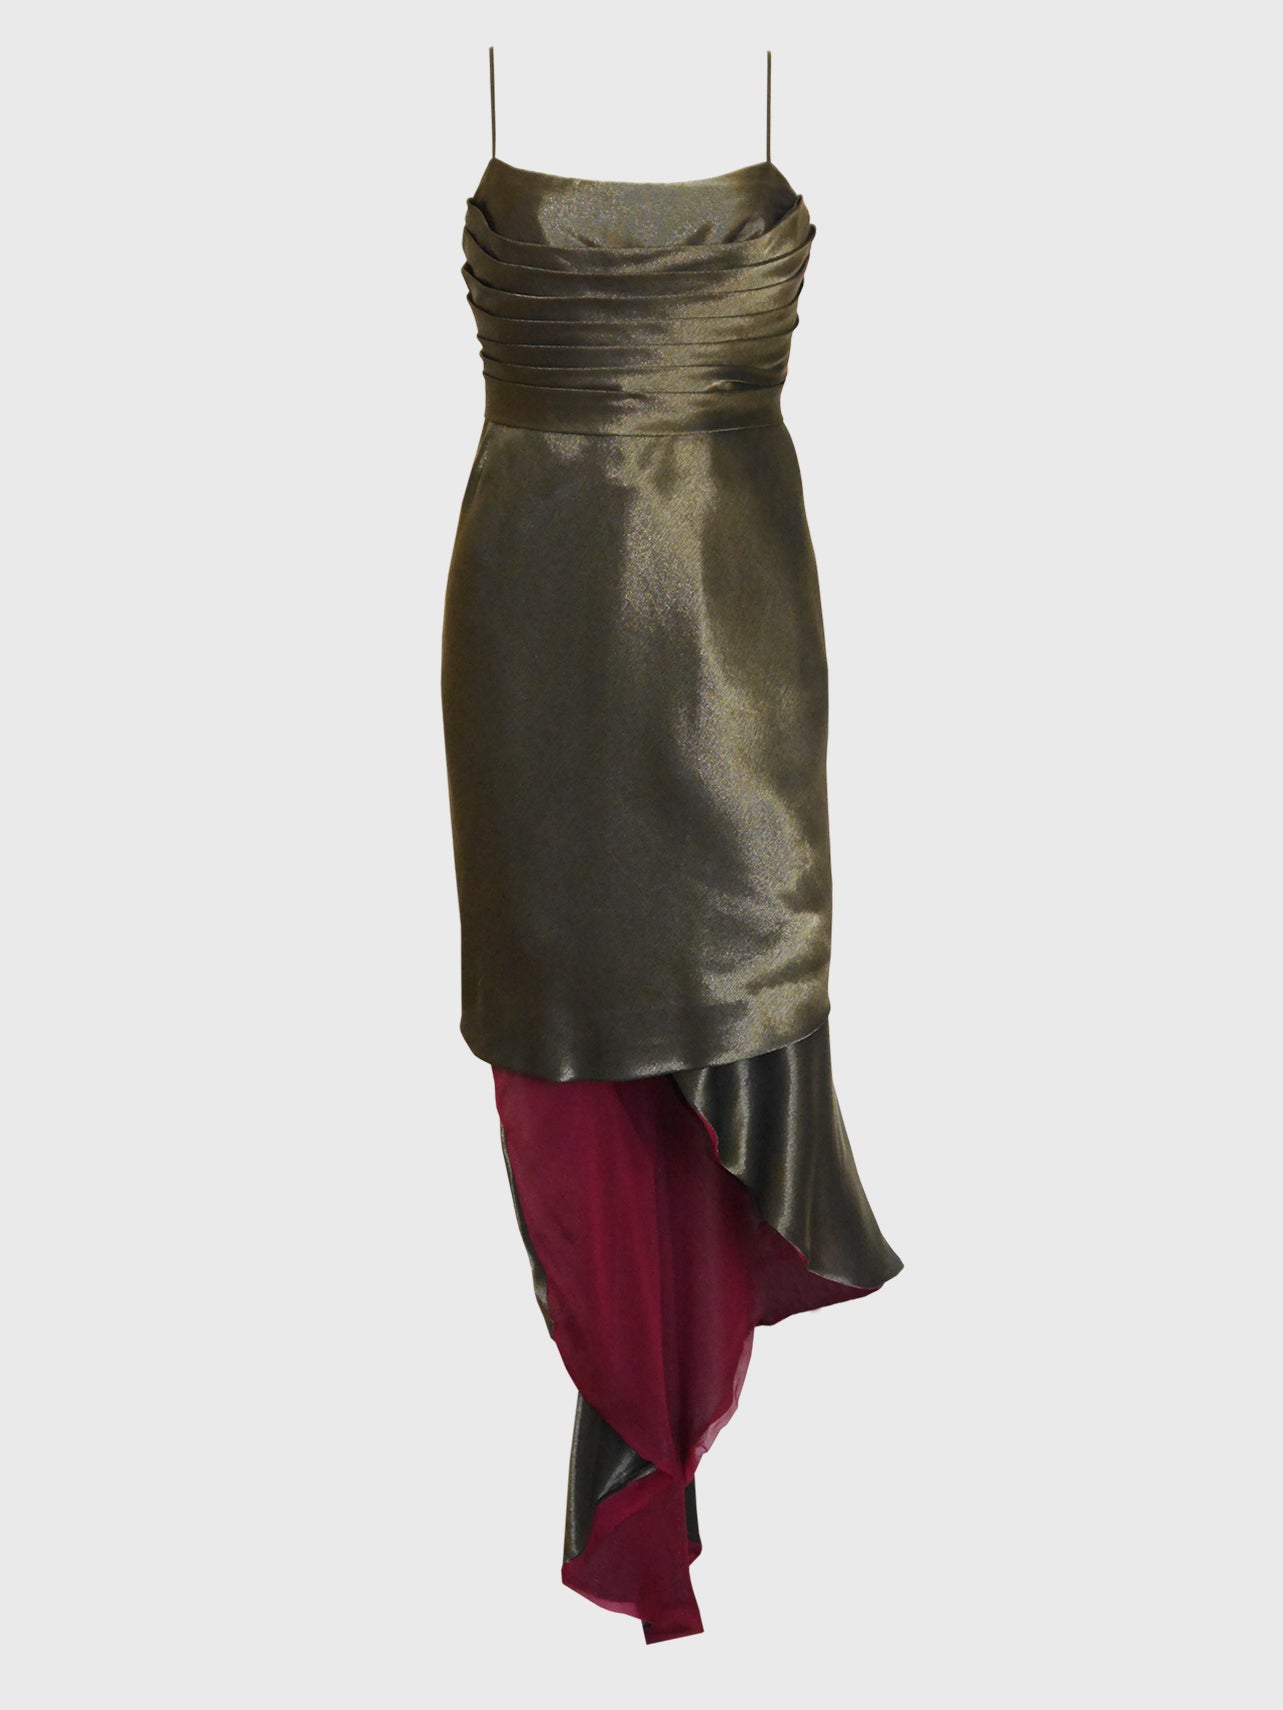 CHANEL by Karl Lagerfeld Fall 1990 Vintage Gold Lamé High-Low Evening Dress